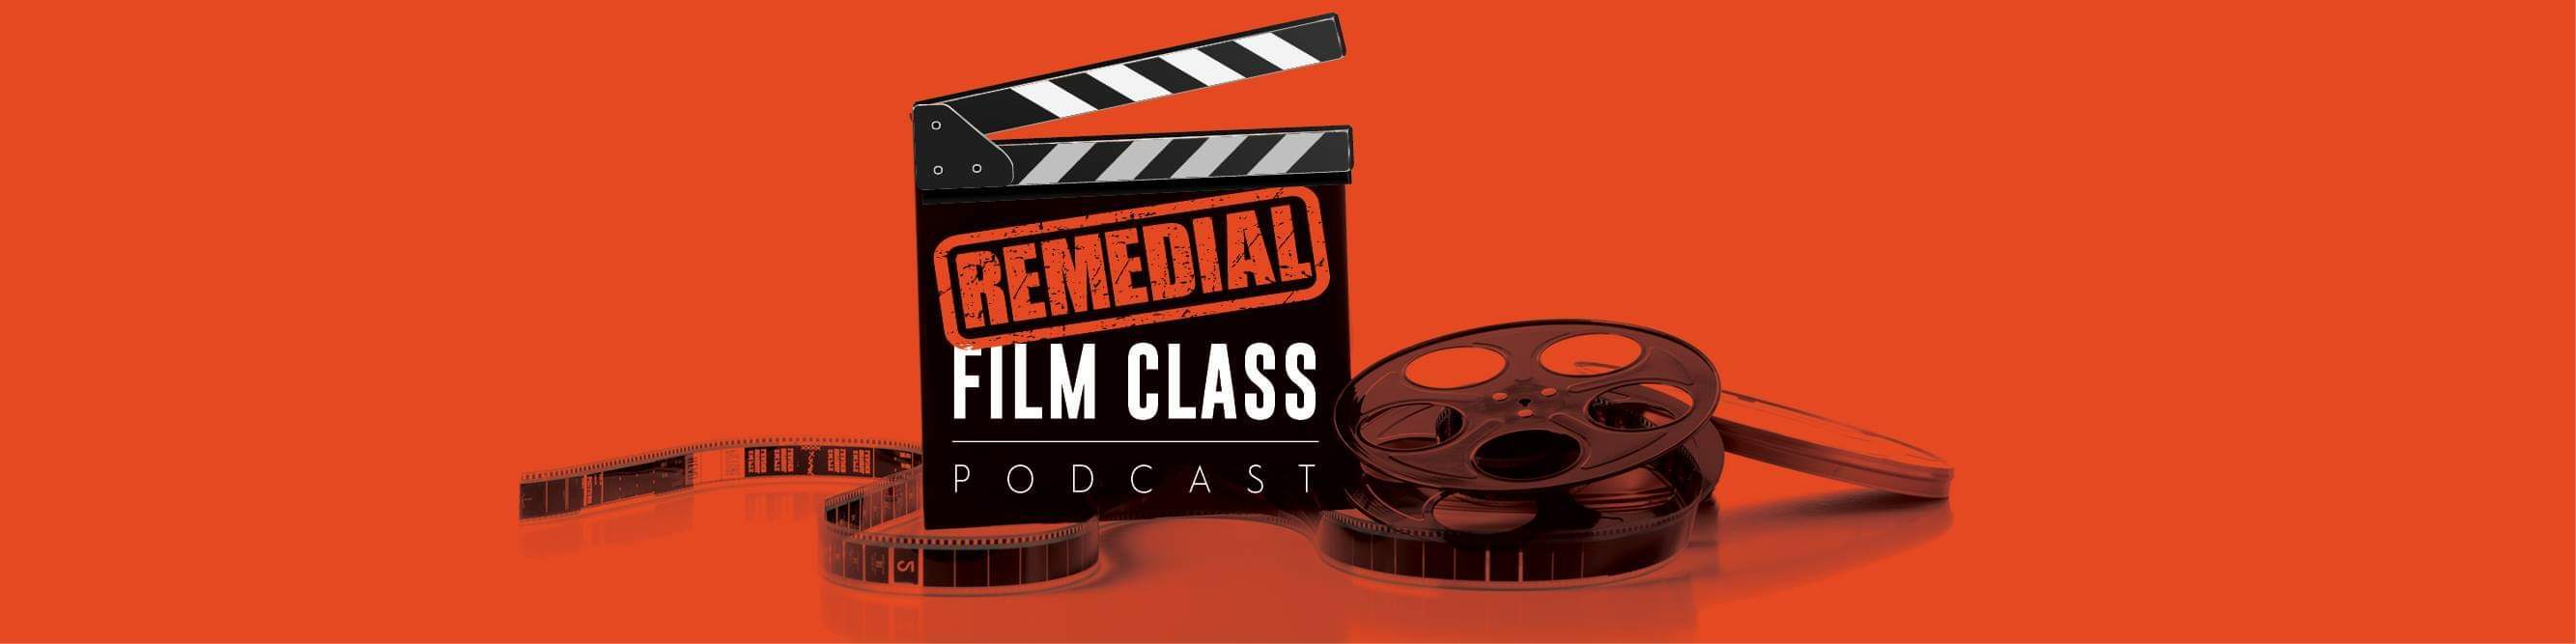 The Remedial Film Class Podcast